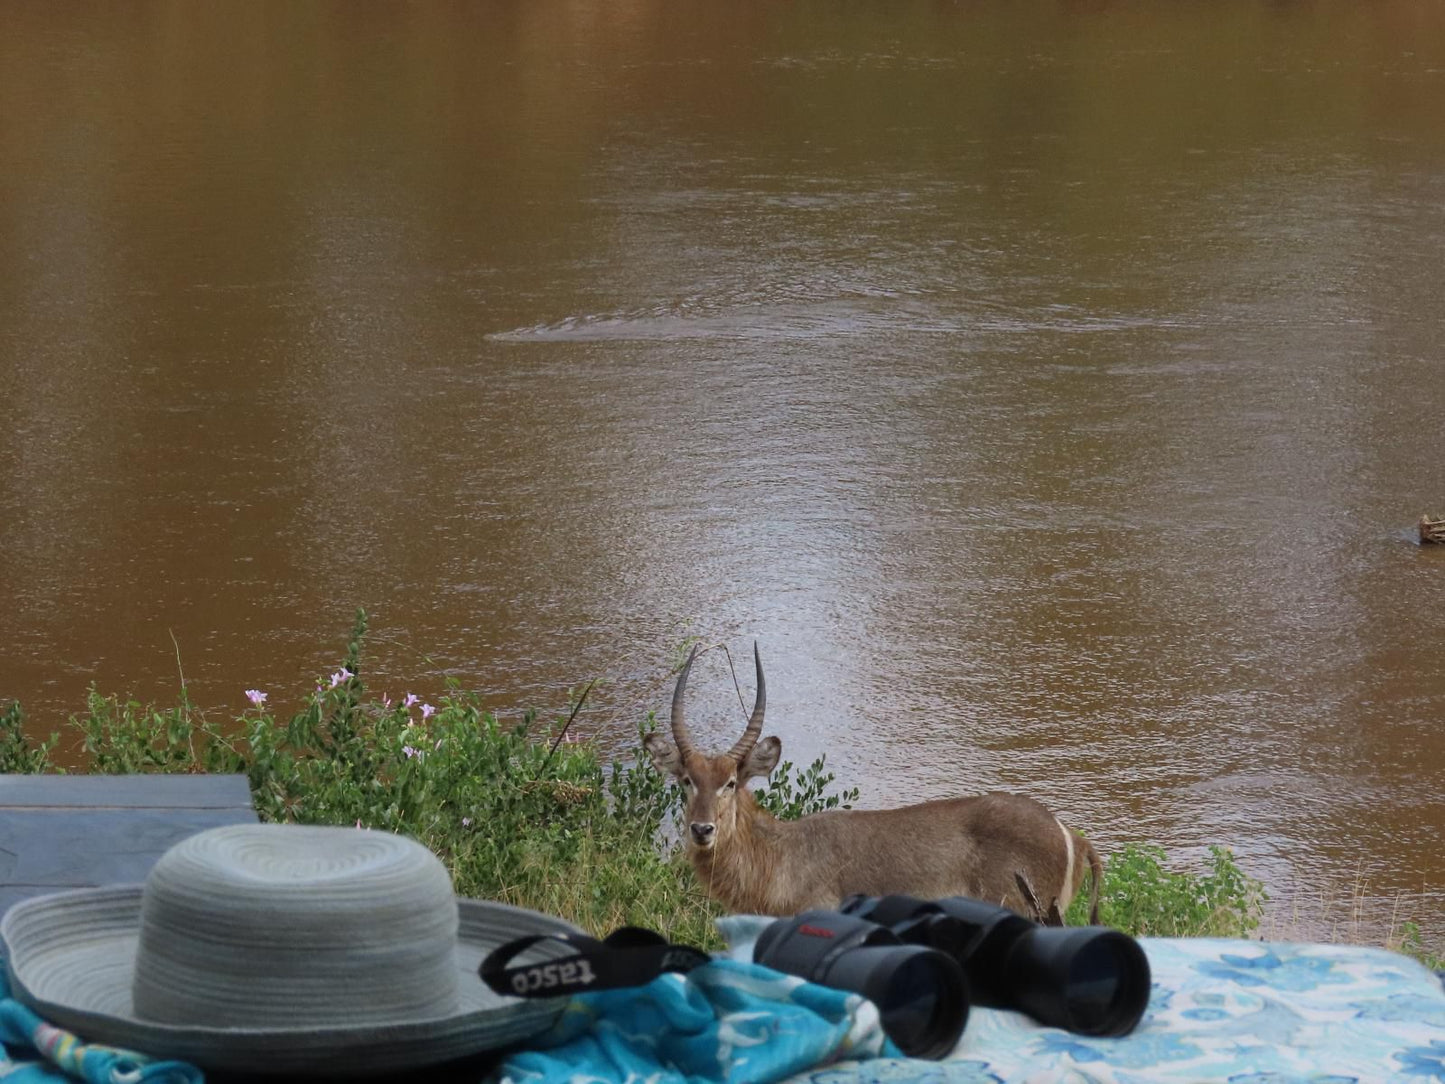 Hennie S Rest Guest House Malelane Mpumalanga South Africa Deer, Mammal, Animal, Herbivore, River, Nature, Waters